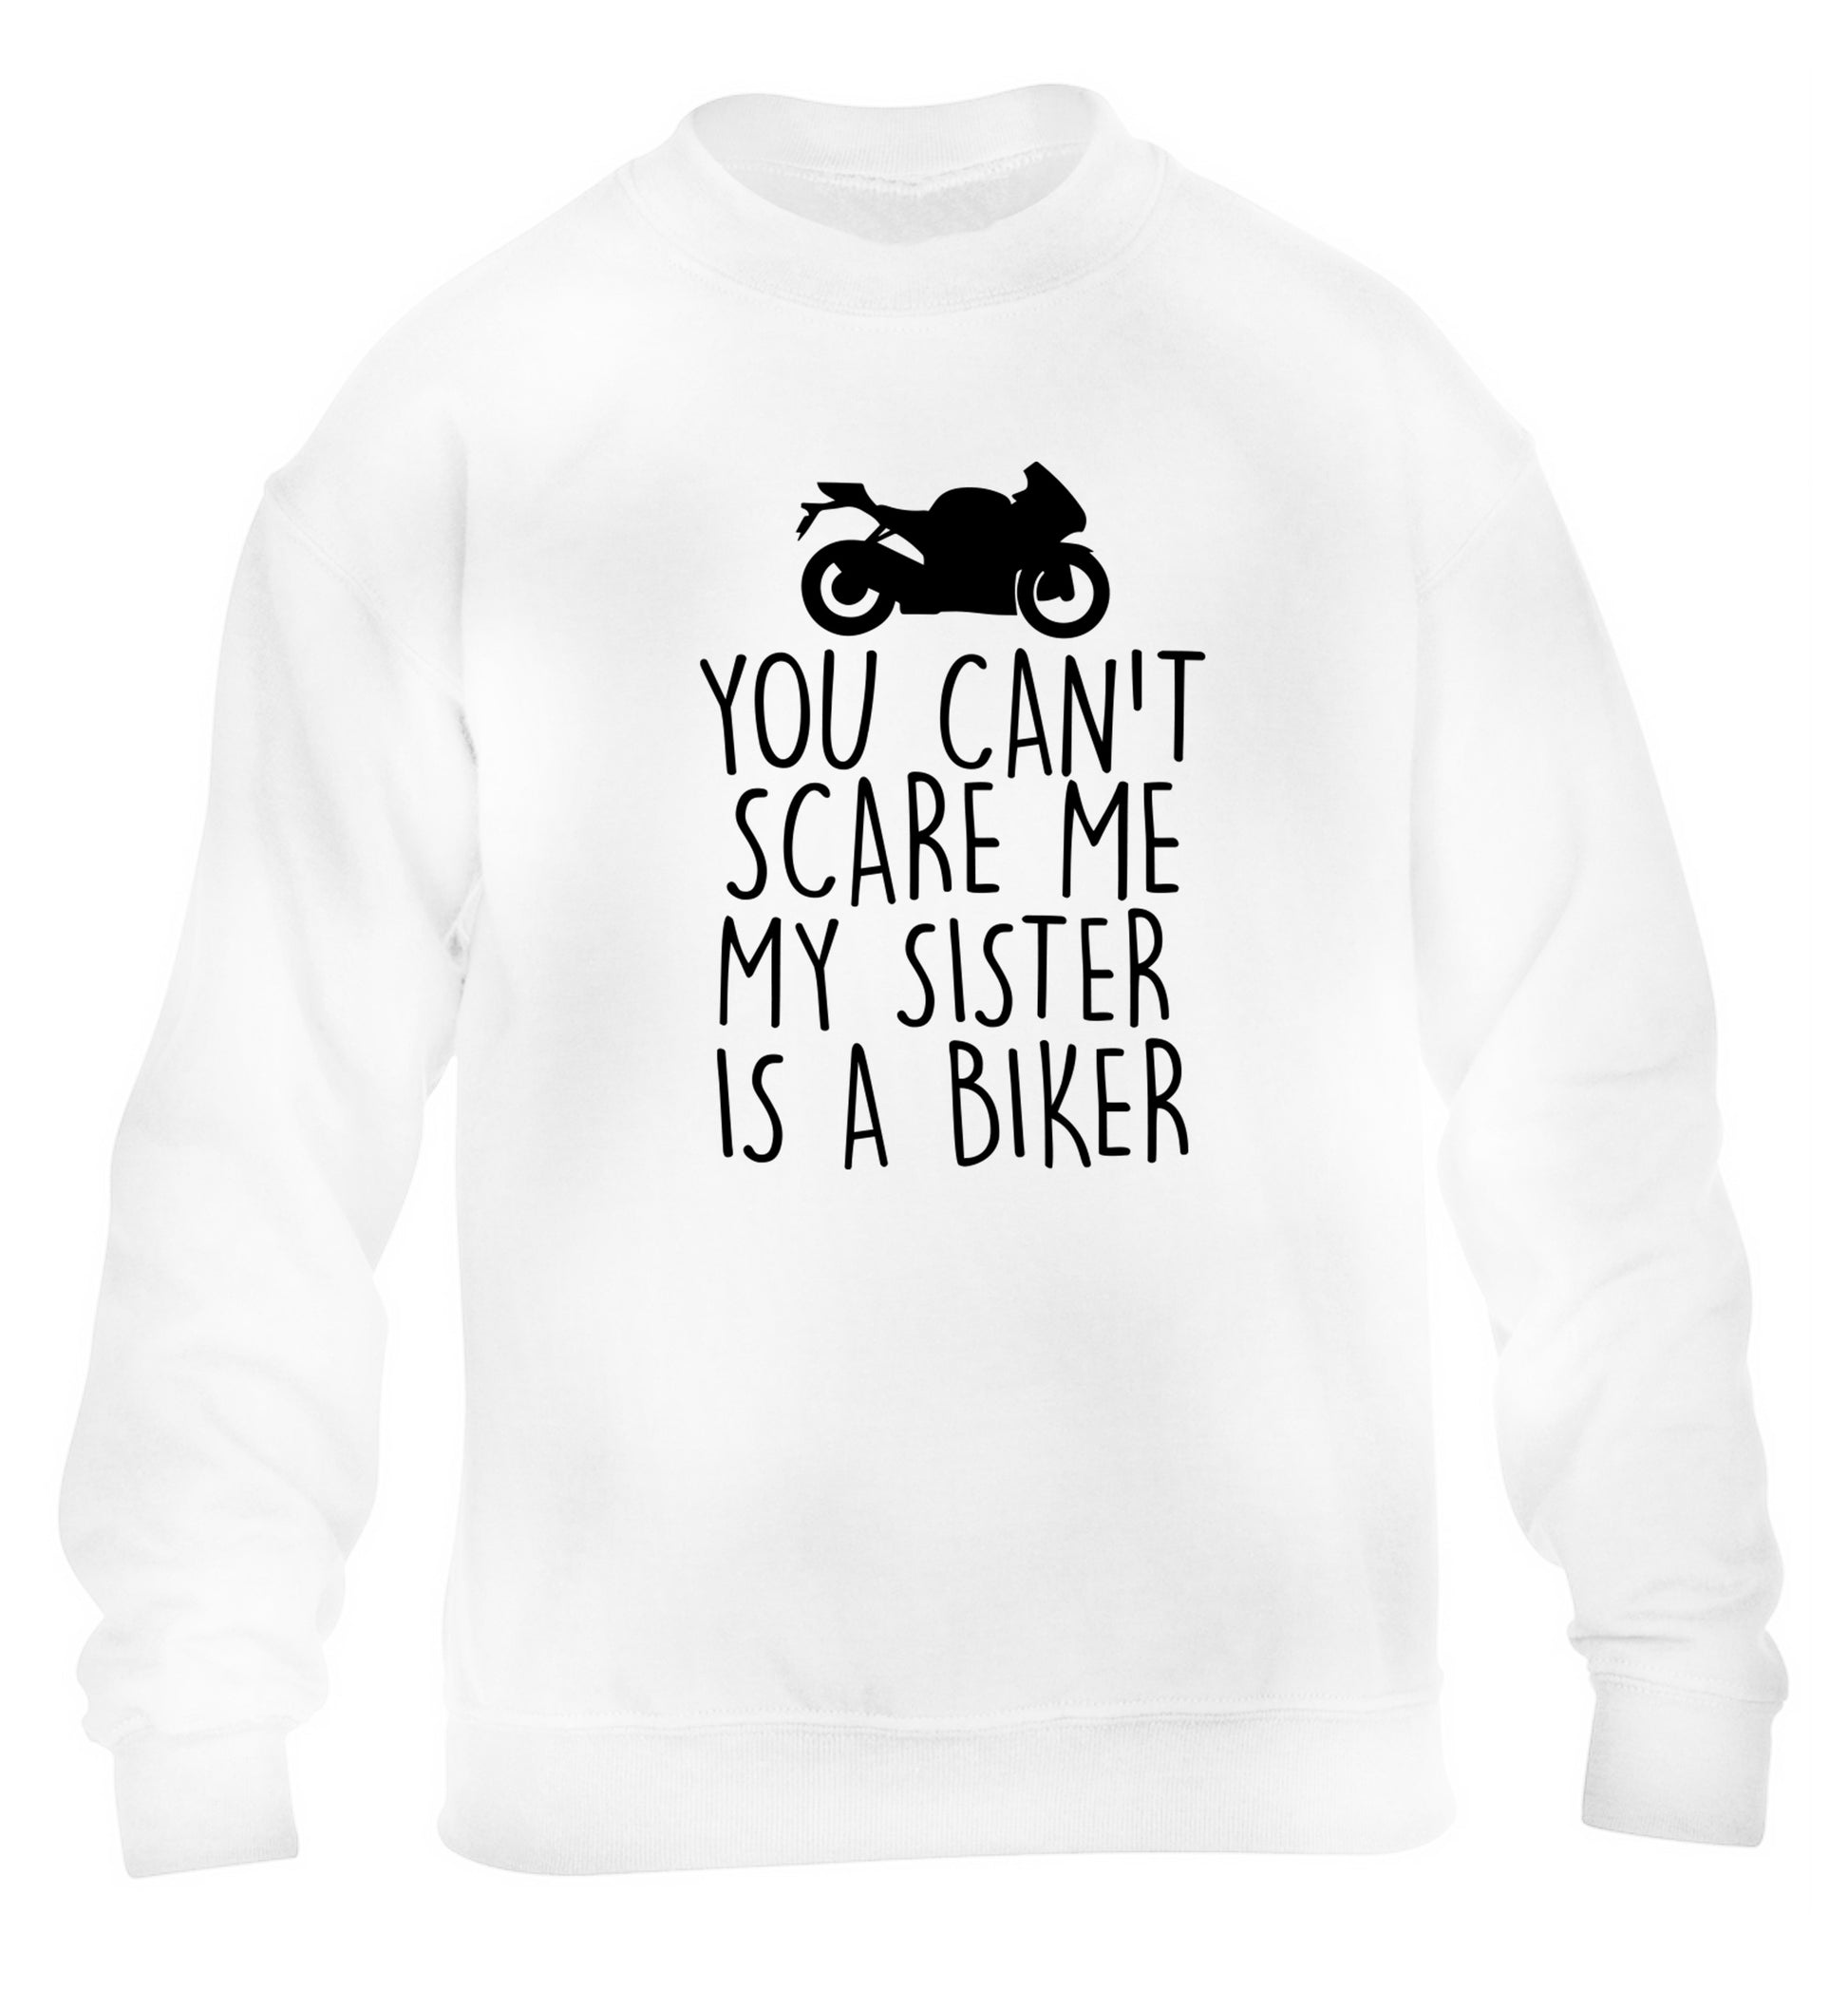 You can't scare me my sister is a biker children's white sweater 12-13 Years